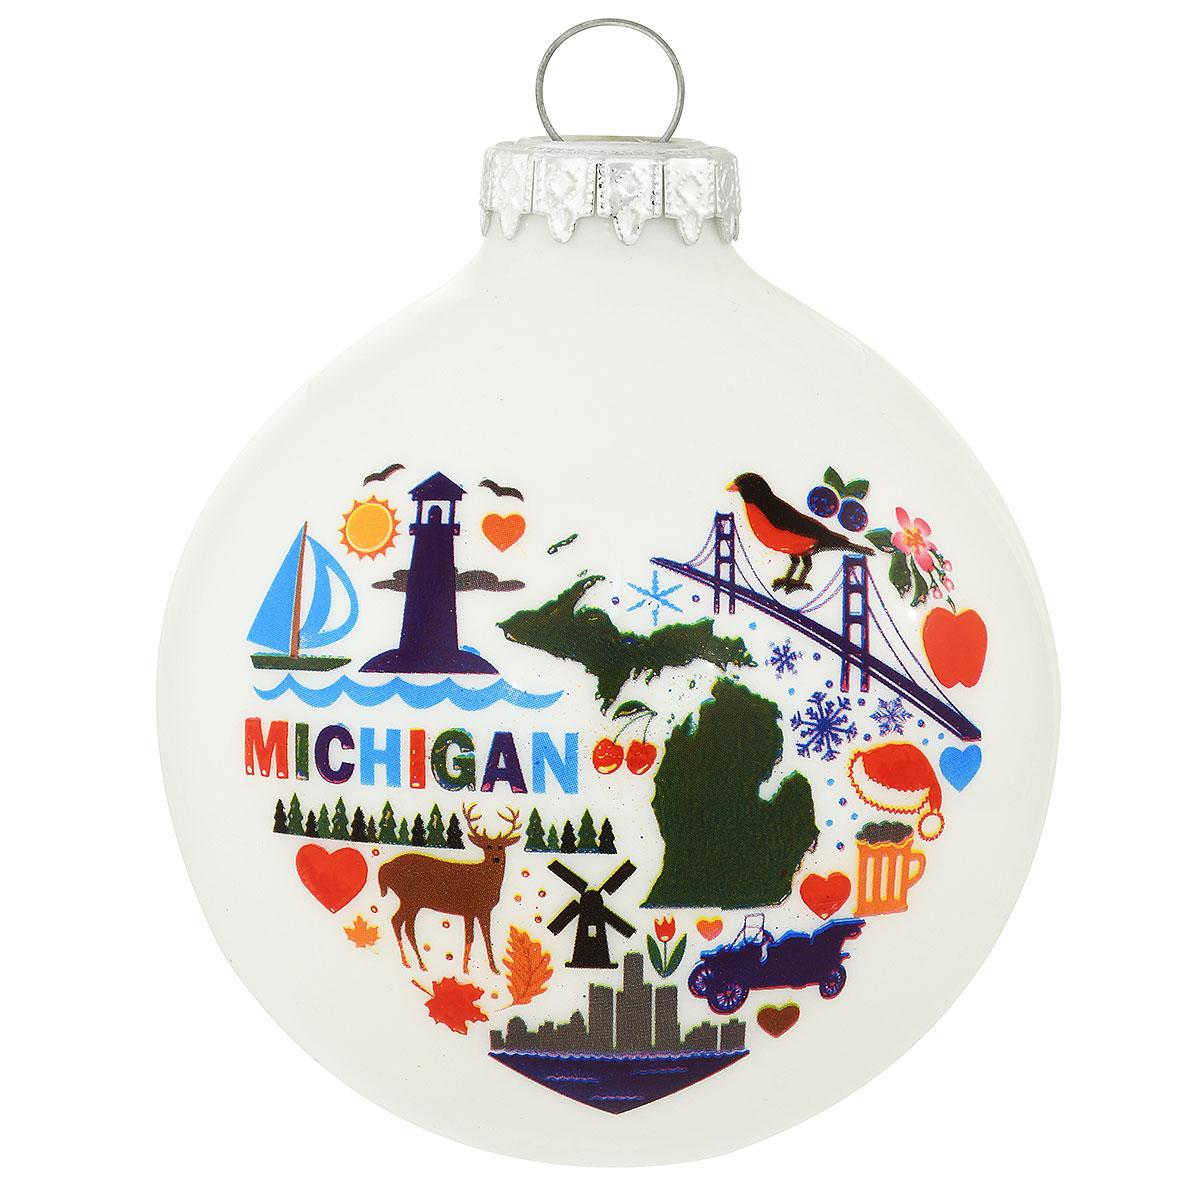 Michigan Icons On Heart Ornament